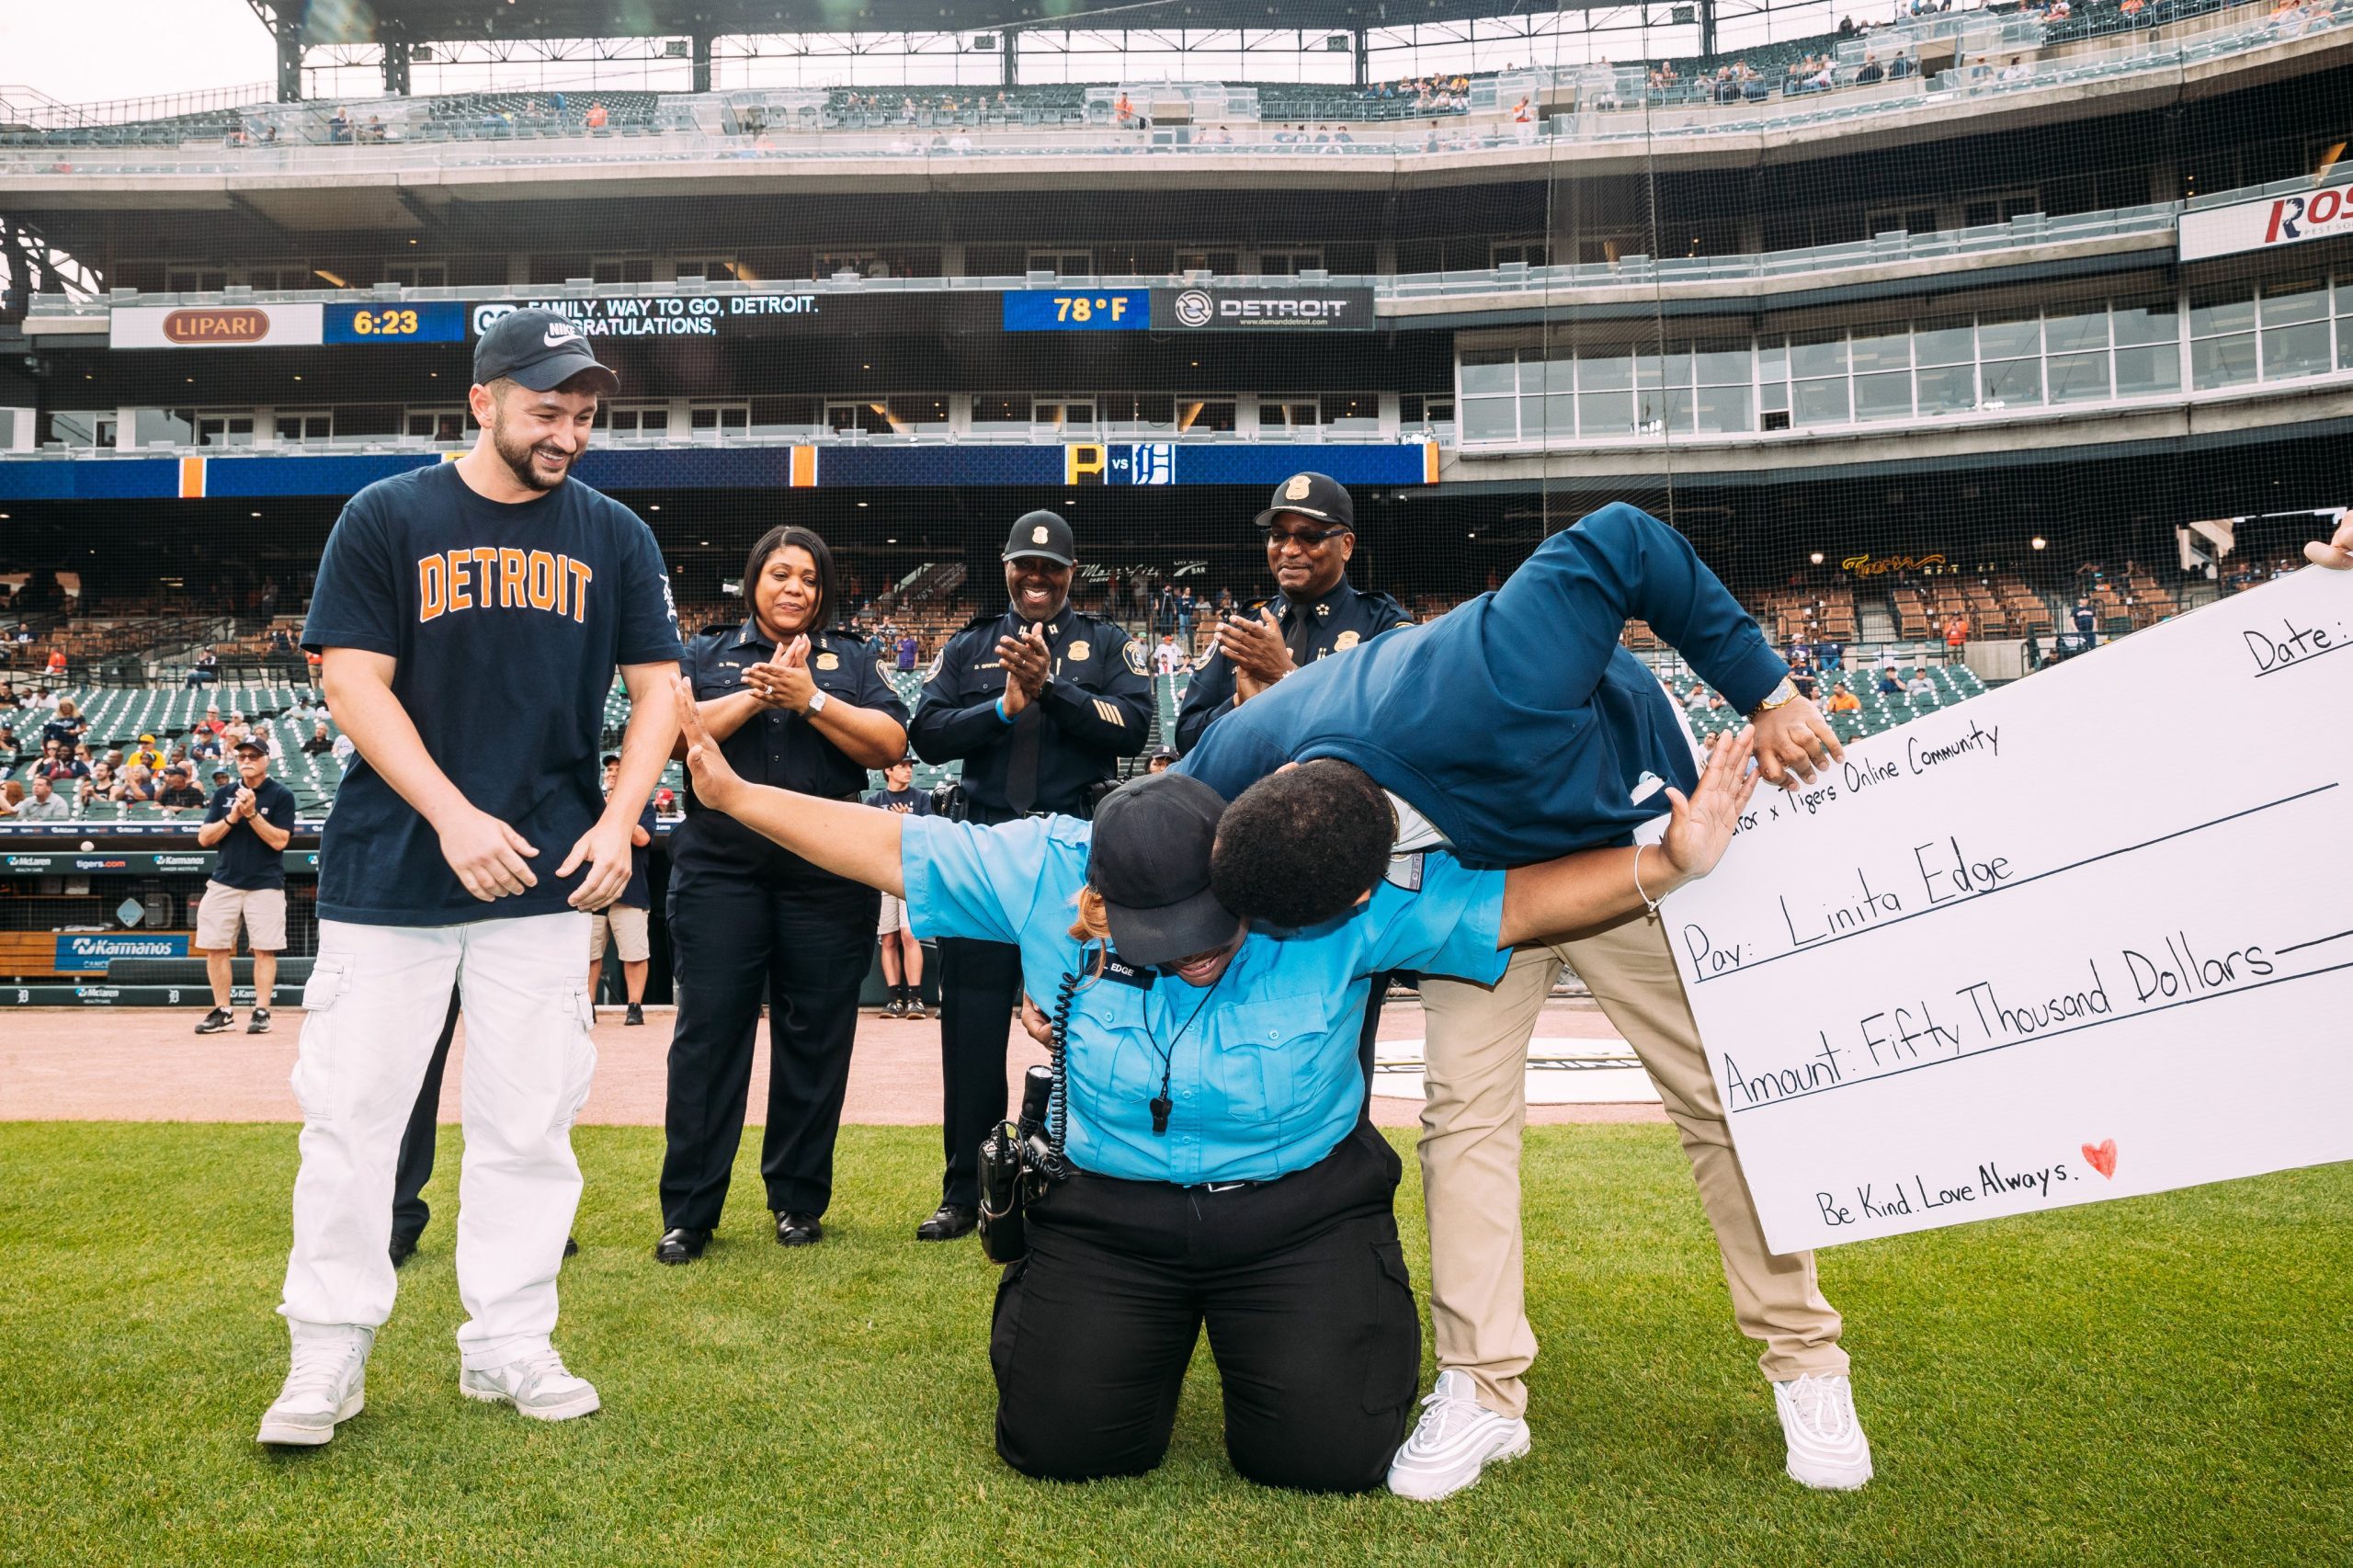 Detroit Tigers Team Up with Influencer to Deliver an Unforgettable